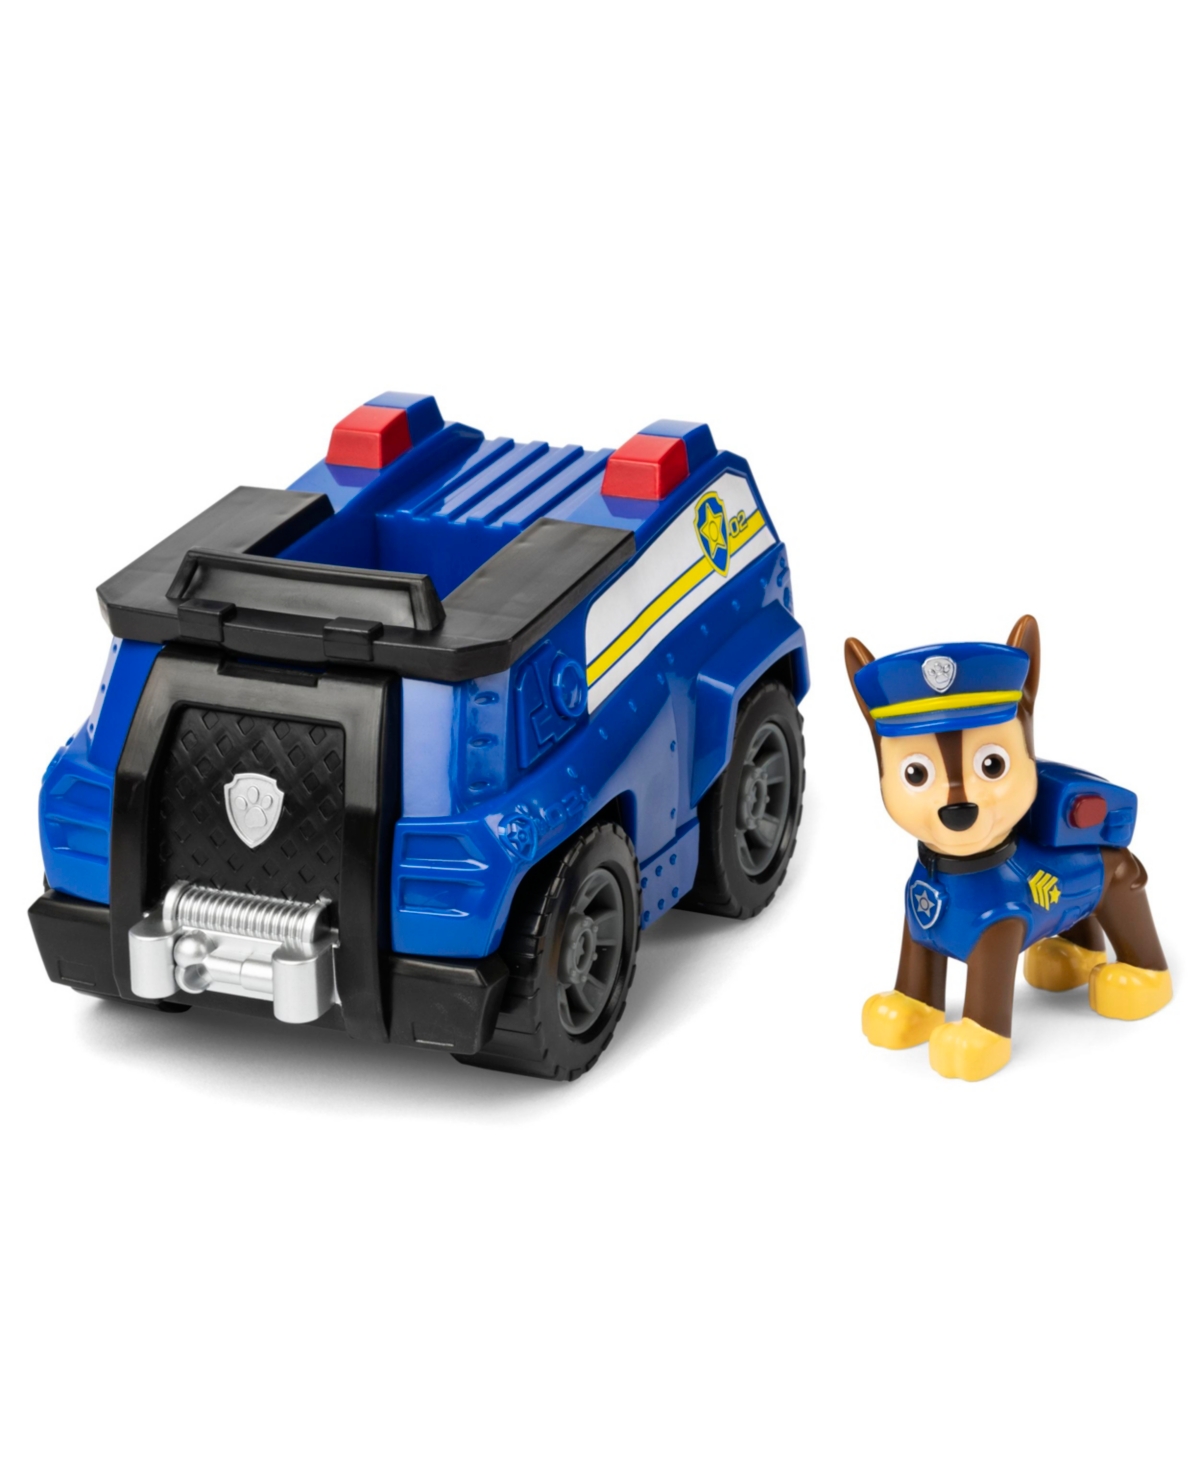 Paw Patrol Chase's Patrol Cruiser Vehicle With Collectible Figure For Kids Aged 3 And Up In No Color